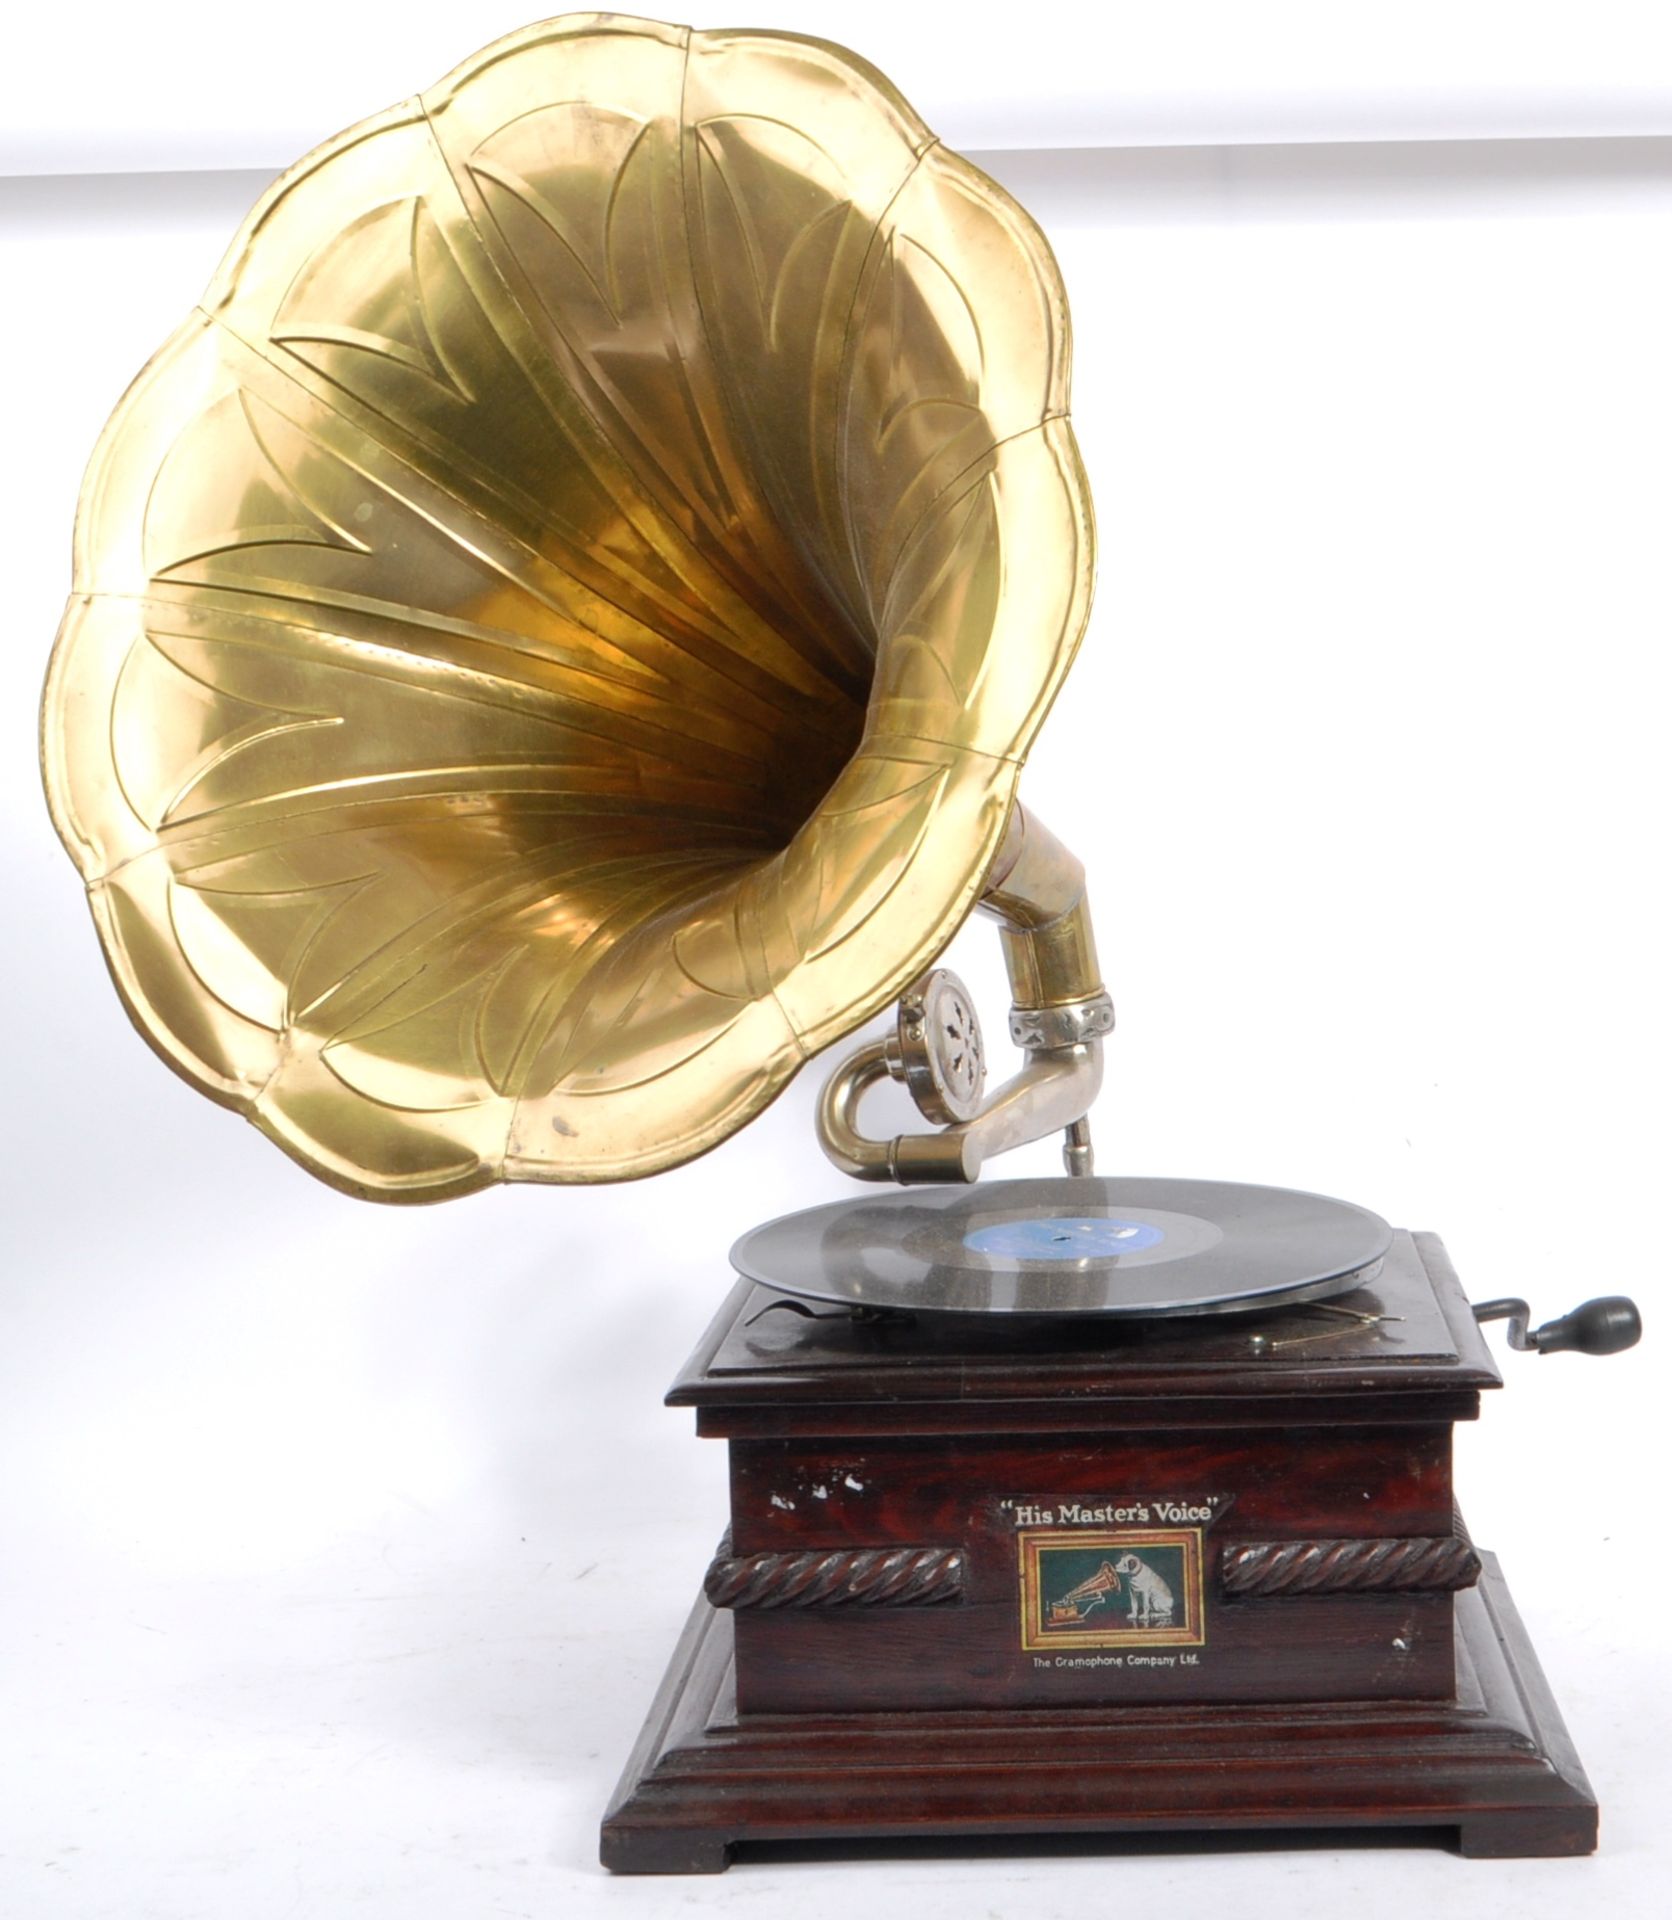 EARLY 20TH CENTURY HIS MASTER'S VOICE GRAMOPHONE